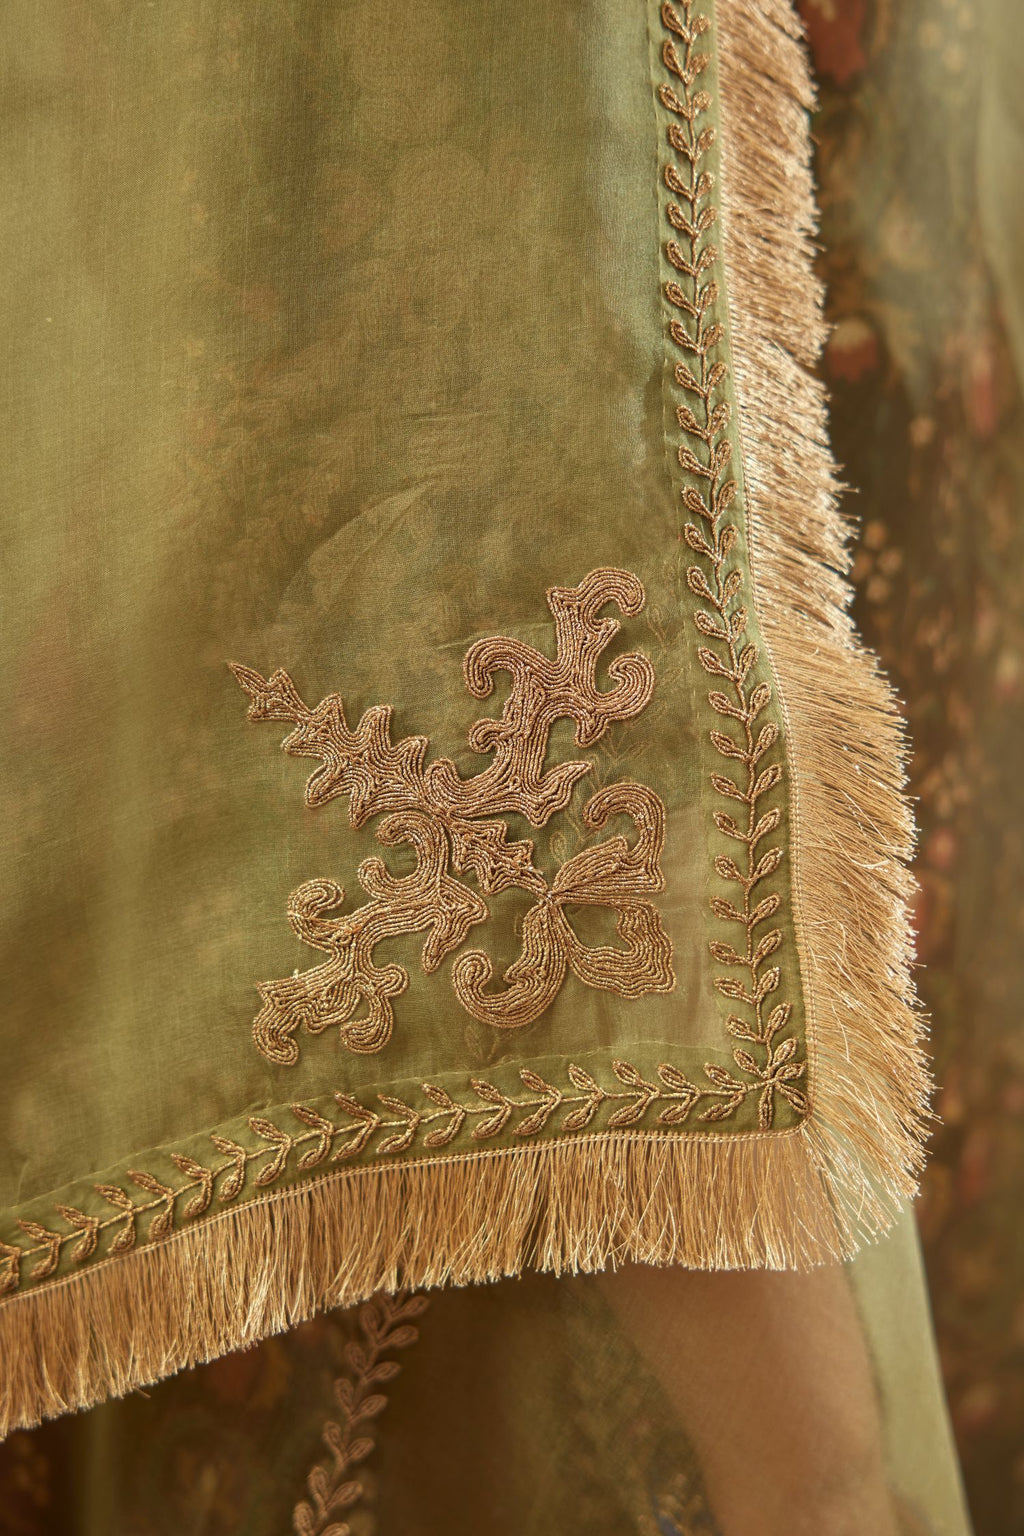 Olive silk organza dupatta detailed with all-over light gold dori embroidery.